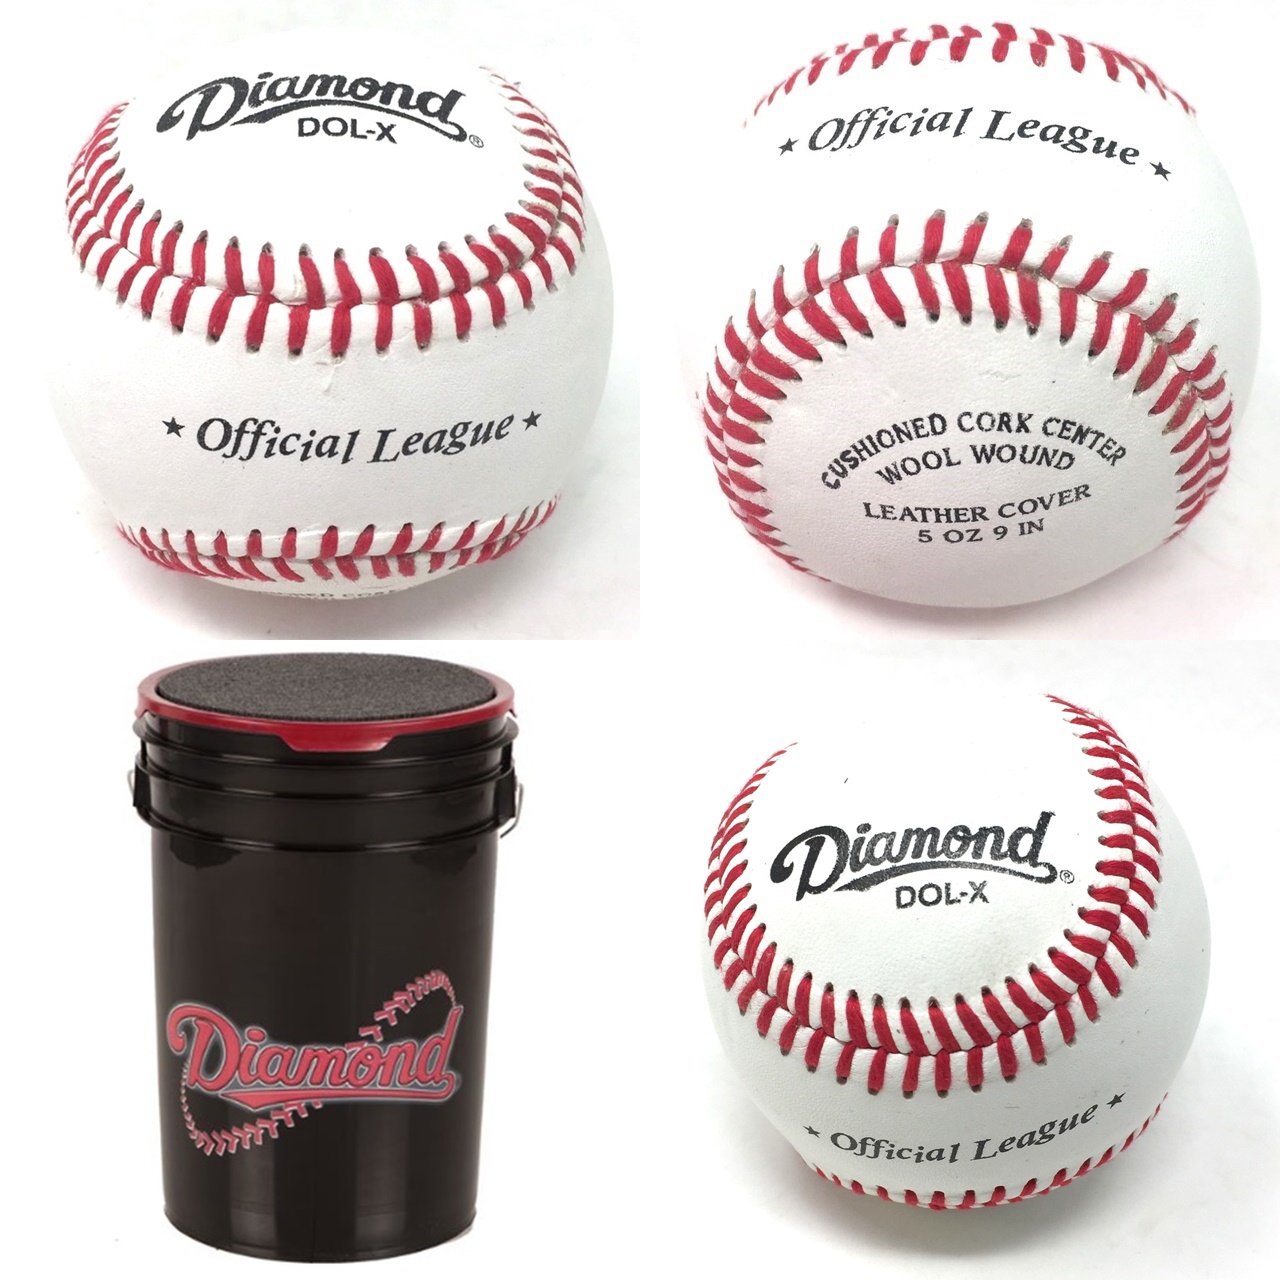 diamond-dol-blem-baseballs-5-dozen-and-bucket DOL-BLEM-5BUCKET Diamond Does Not Apply Diamond baseballs are the highest quality and most popular brand of